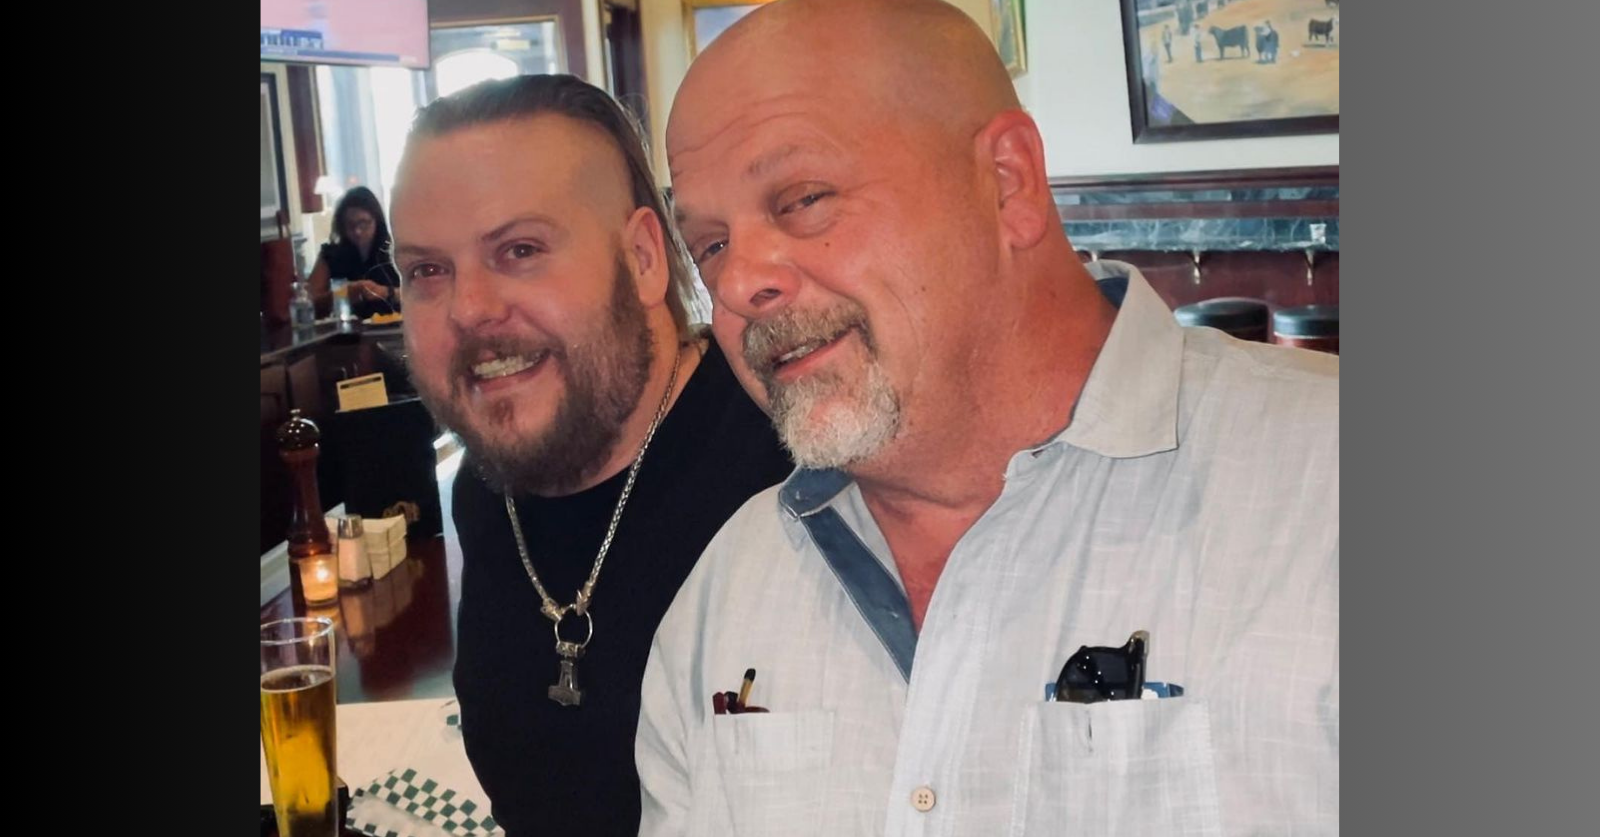 ‘Pawn Stars’ lead says his son died from fentanyl